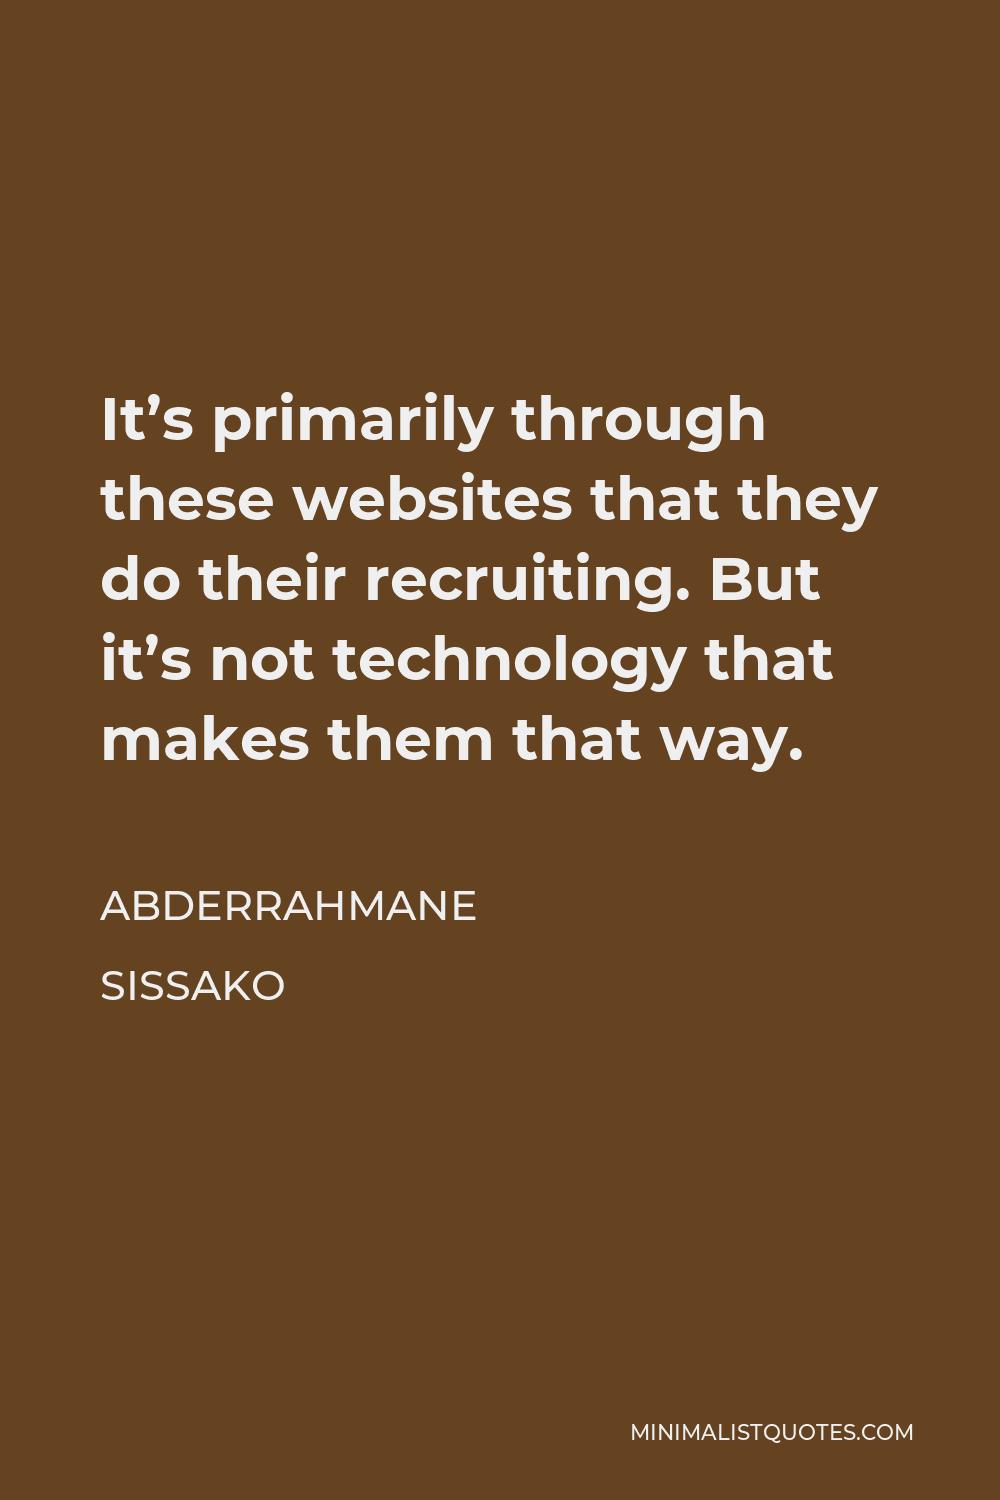 Abderrahmane Sissako Quote - It’s primarily through these websites that they do their recruiting. But it’s not technology that makes them that way.